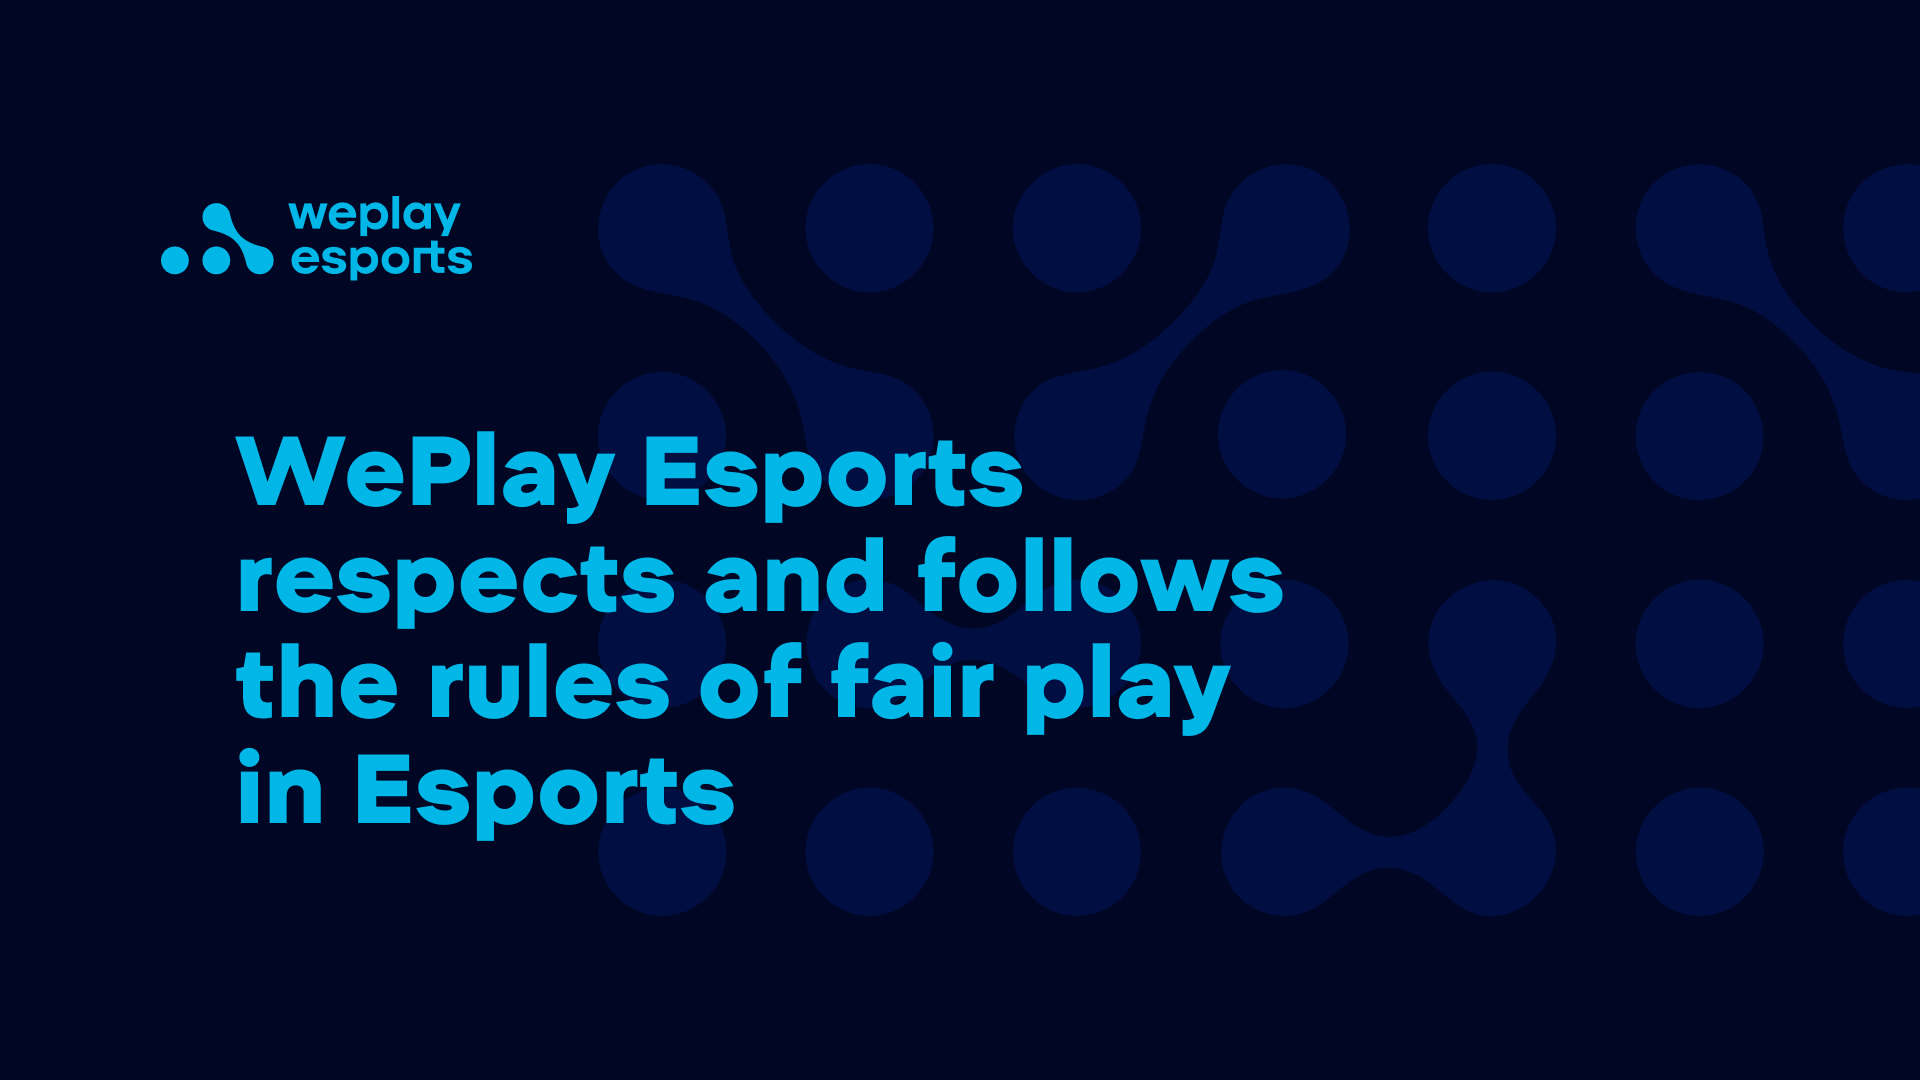 WePlay Esports respects and follows the rules of fair play in Esports